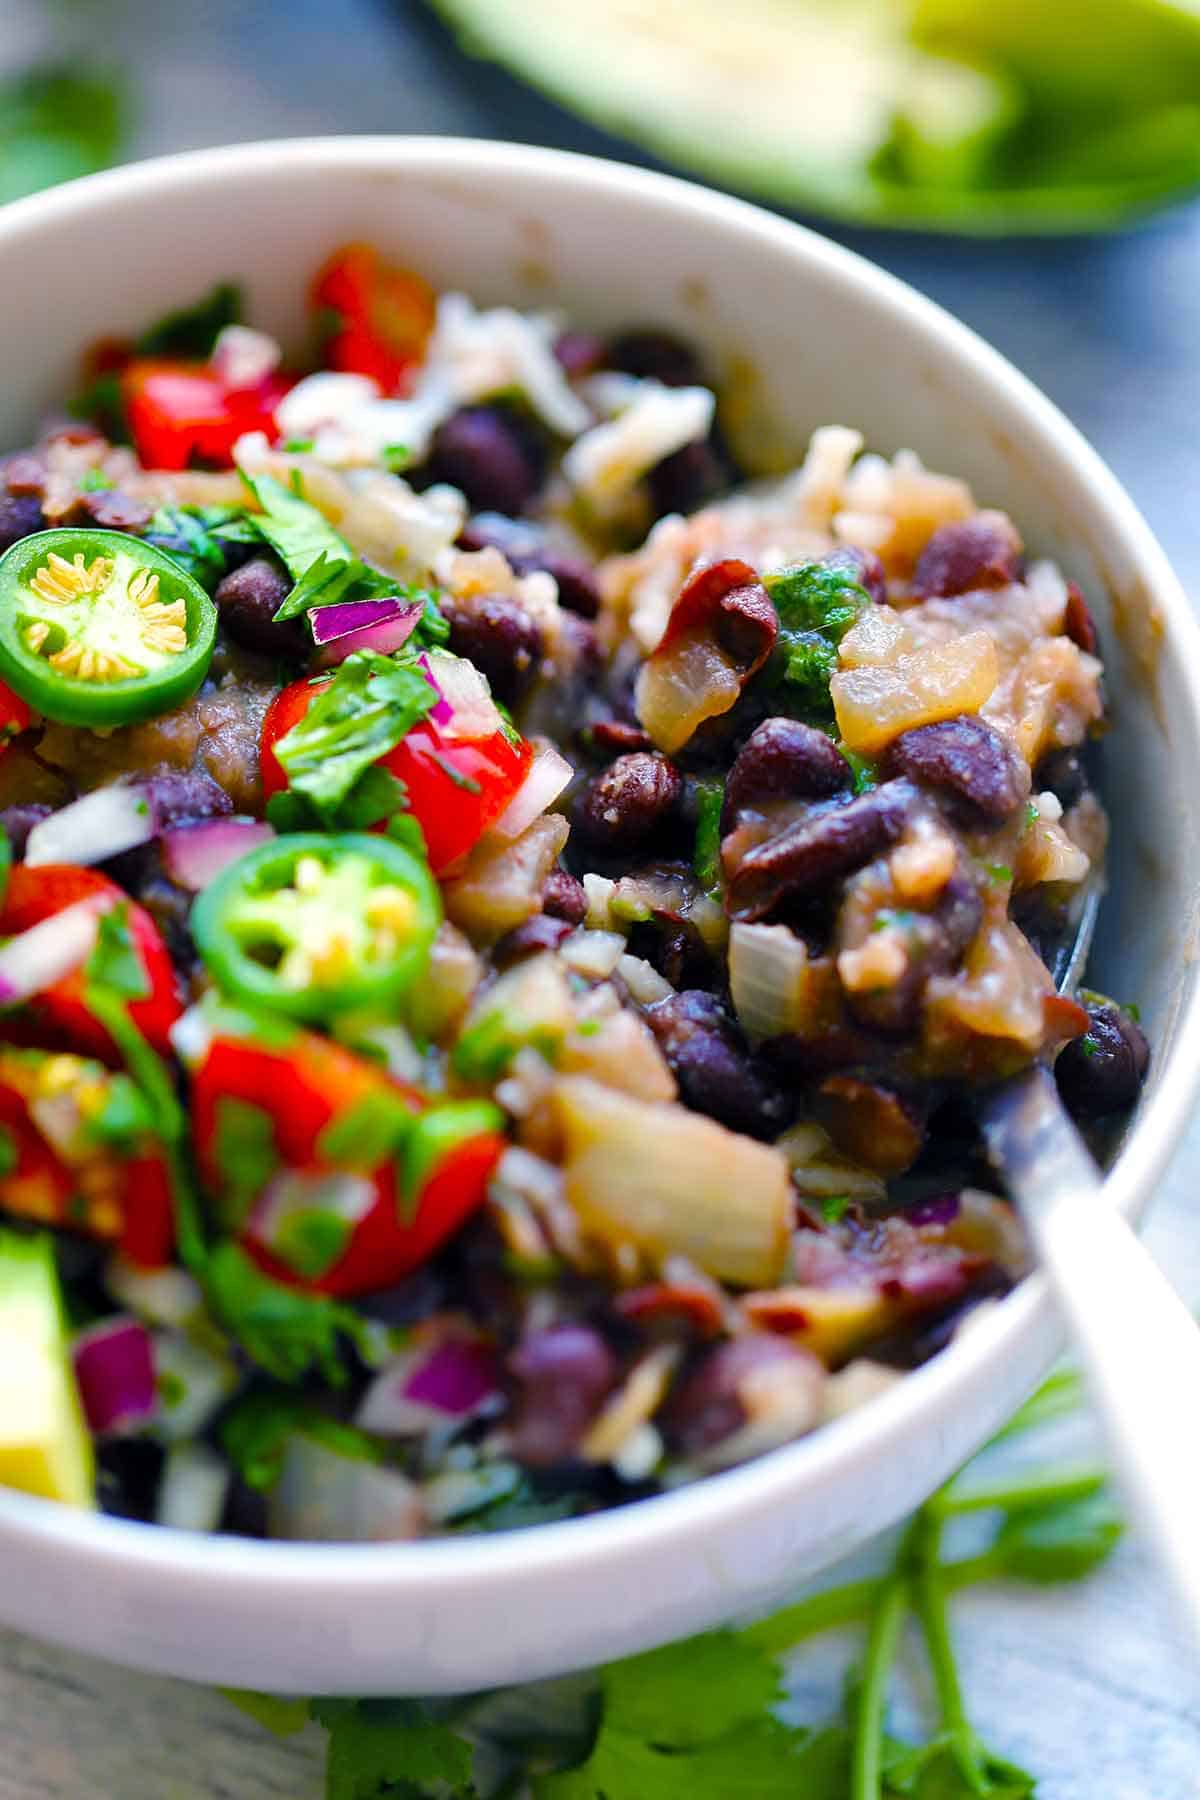 These vegan black beans and rice come together in only 25 minutes! Kid friendly, great as a side or full meal, and packed with delicious flavor. #kidfriendly #blackbeans #Vegan